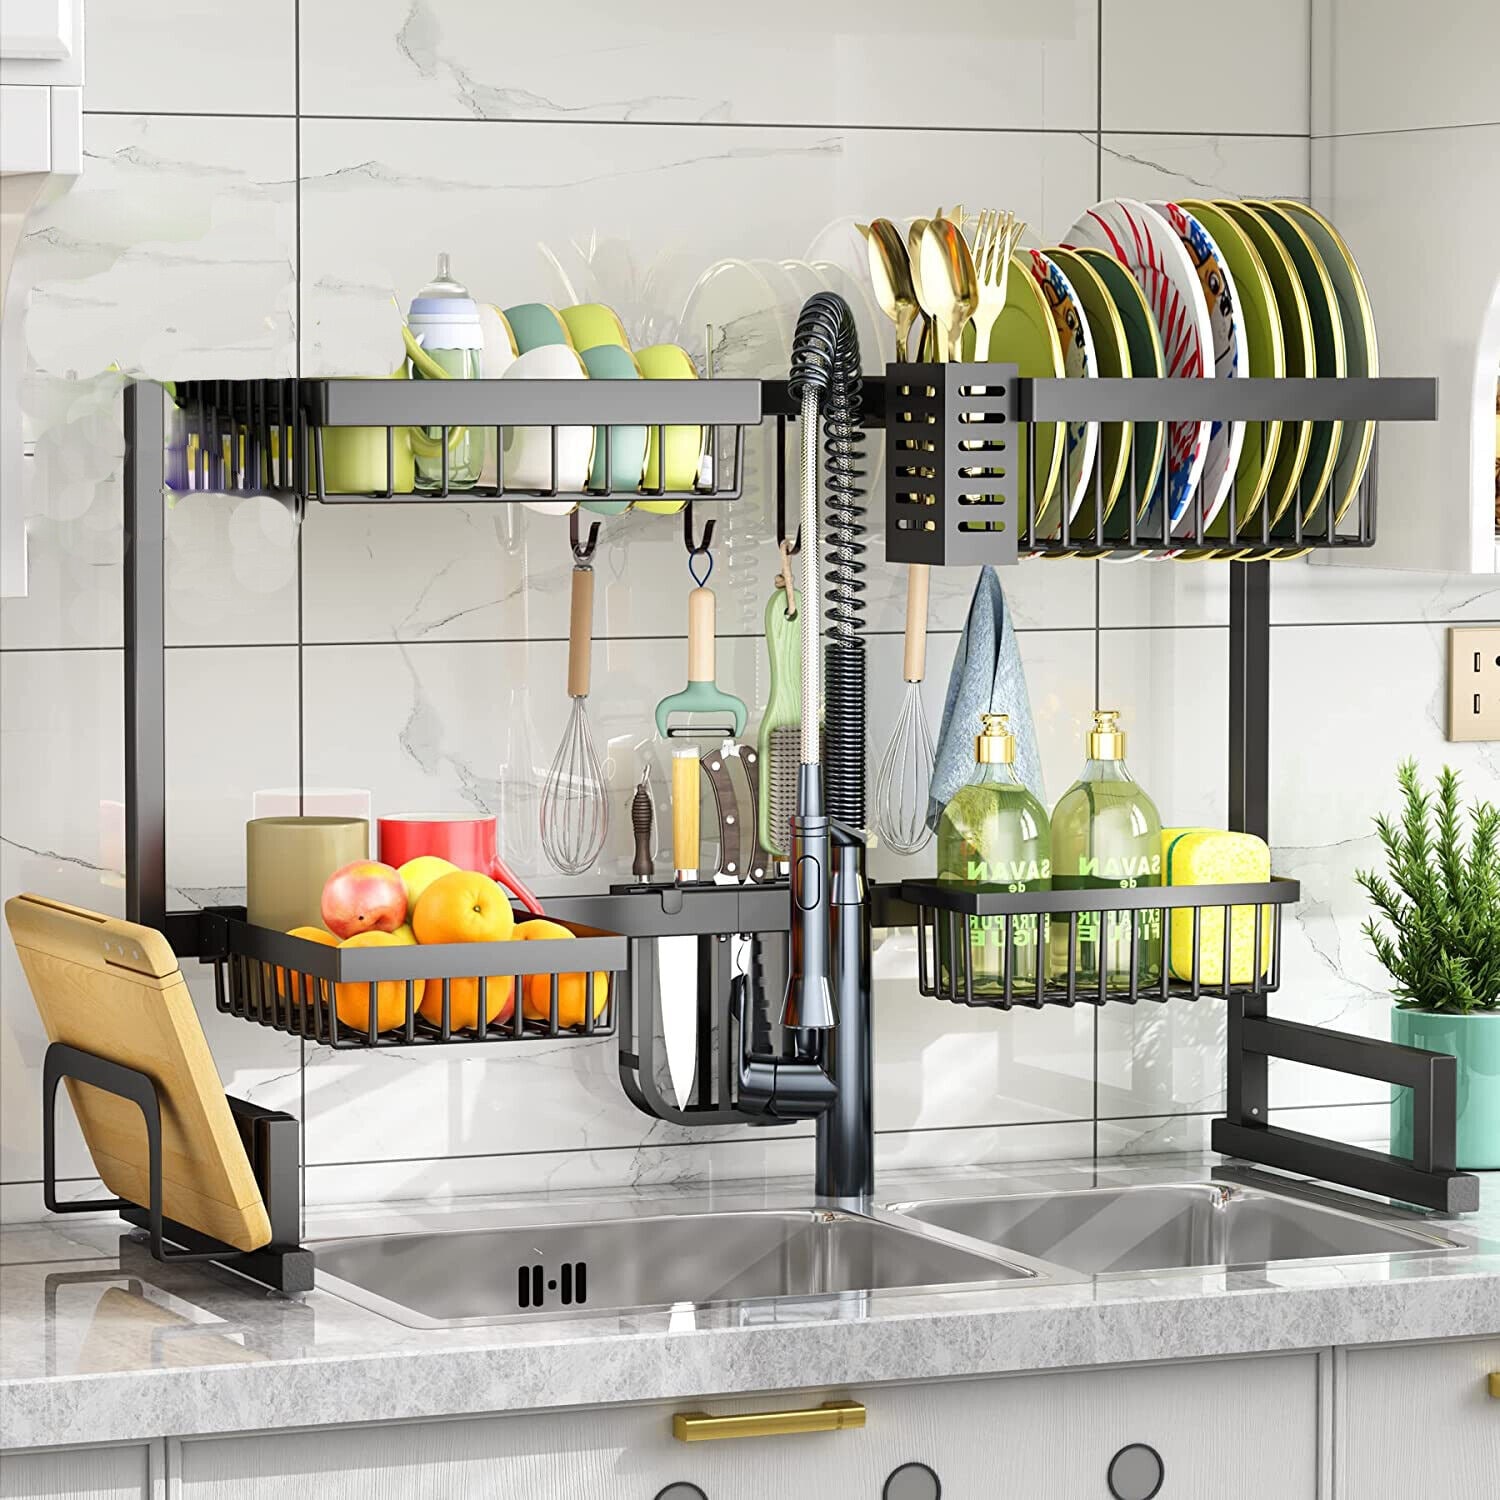 https://ak1.ostkcdn.com/images/products/is/images/direct/5ccb5ecfff9b5085fa6d1d860f1b5fe46db1e7f8/Over-Sink-Dish-Drying-Rack-Kitchen-Organizer-Set.jpg